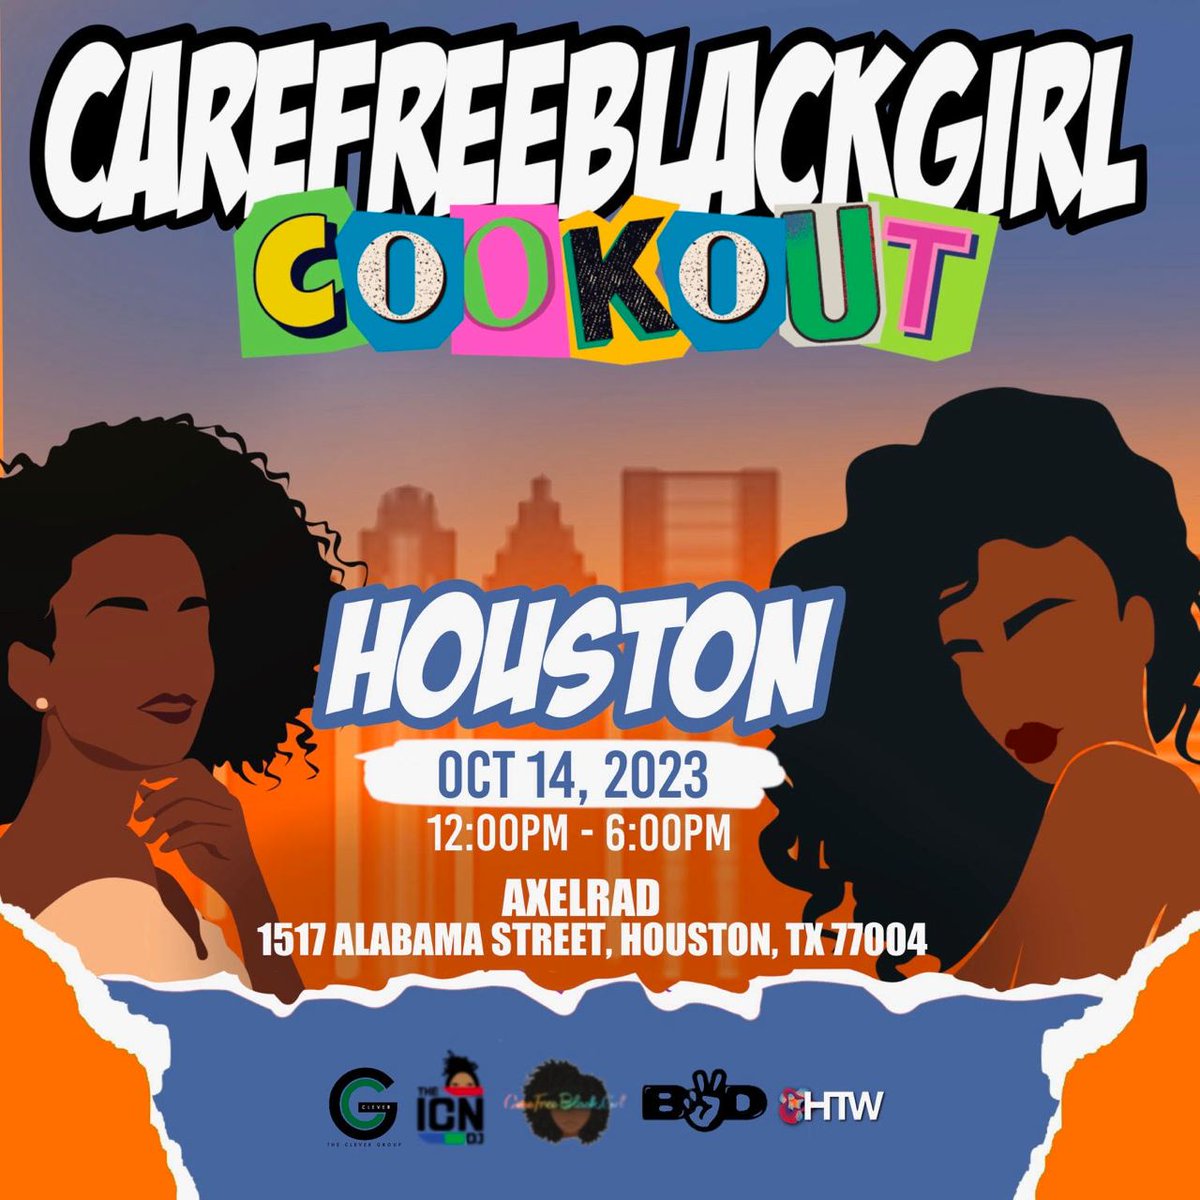 😊😊 Happy to be partnering with a brand that I've admired for a while! 

#CareFreeBlackGirl is coming to Houston in October!!! I'm excited!!!
It'll be right at the end of Houston Tech Week!

Get Tickets. They're going fast don't miss out ---> eventnoire.com/events/carefre…